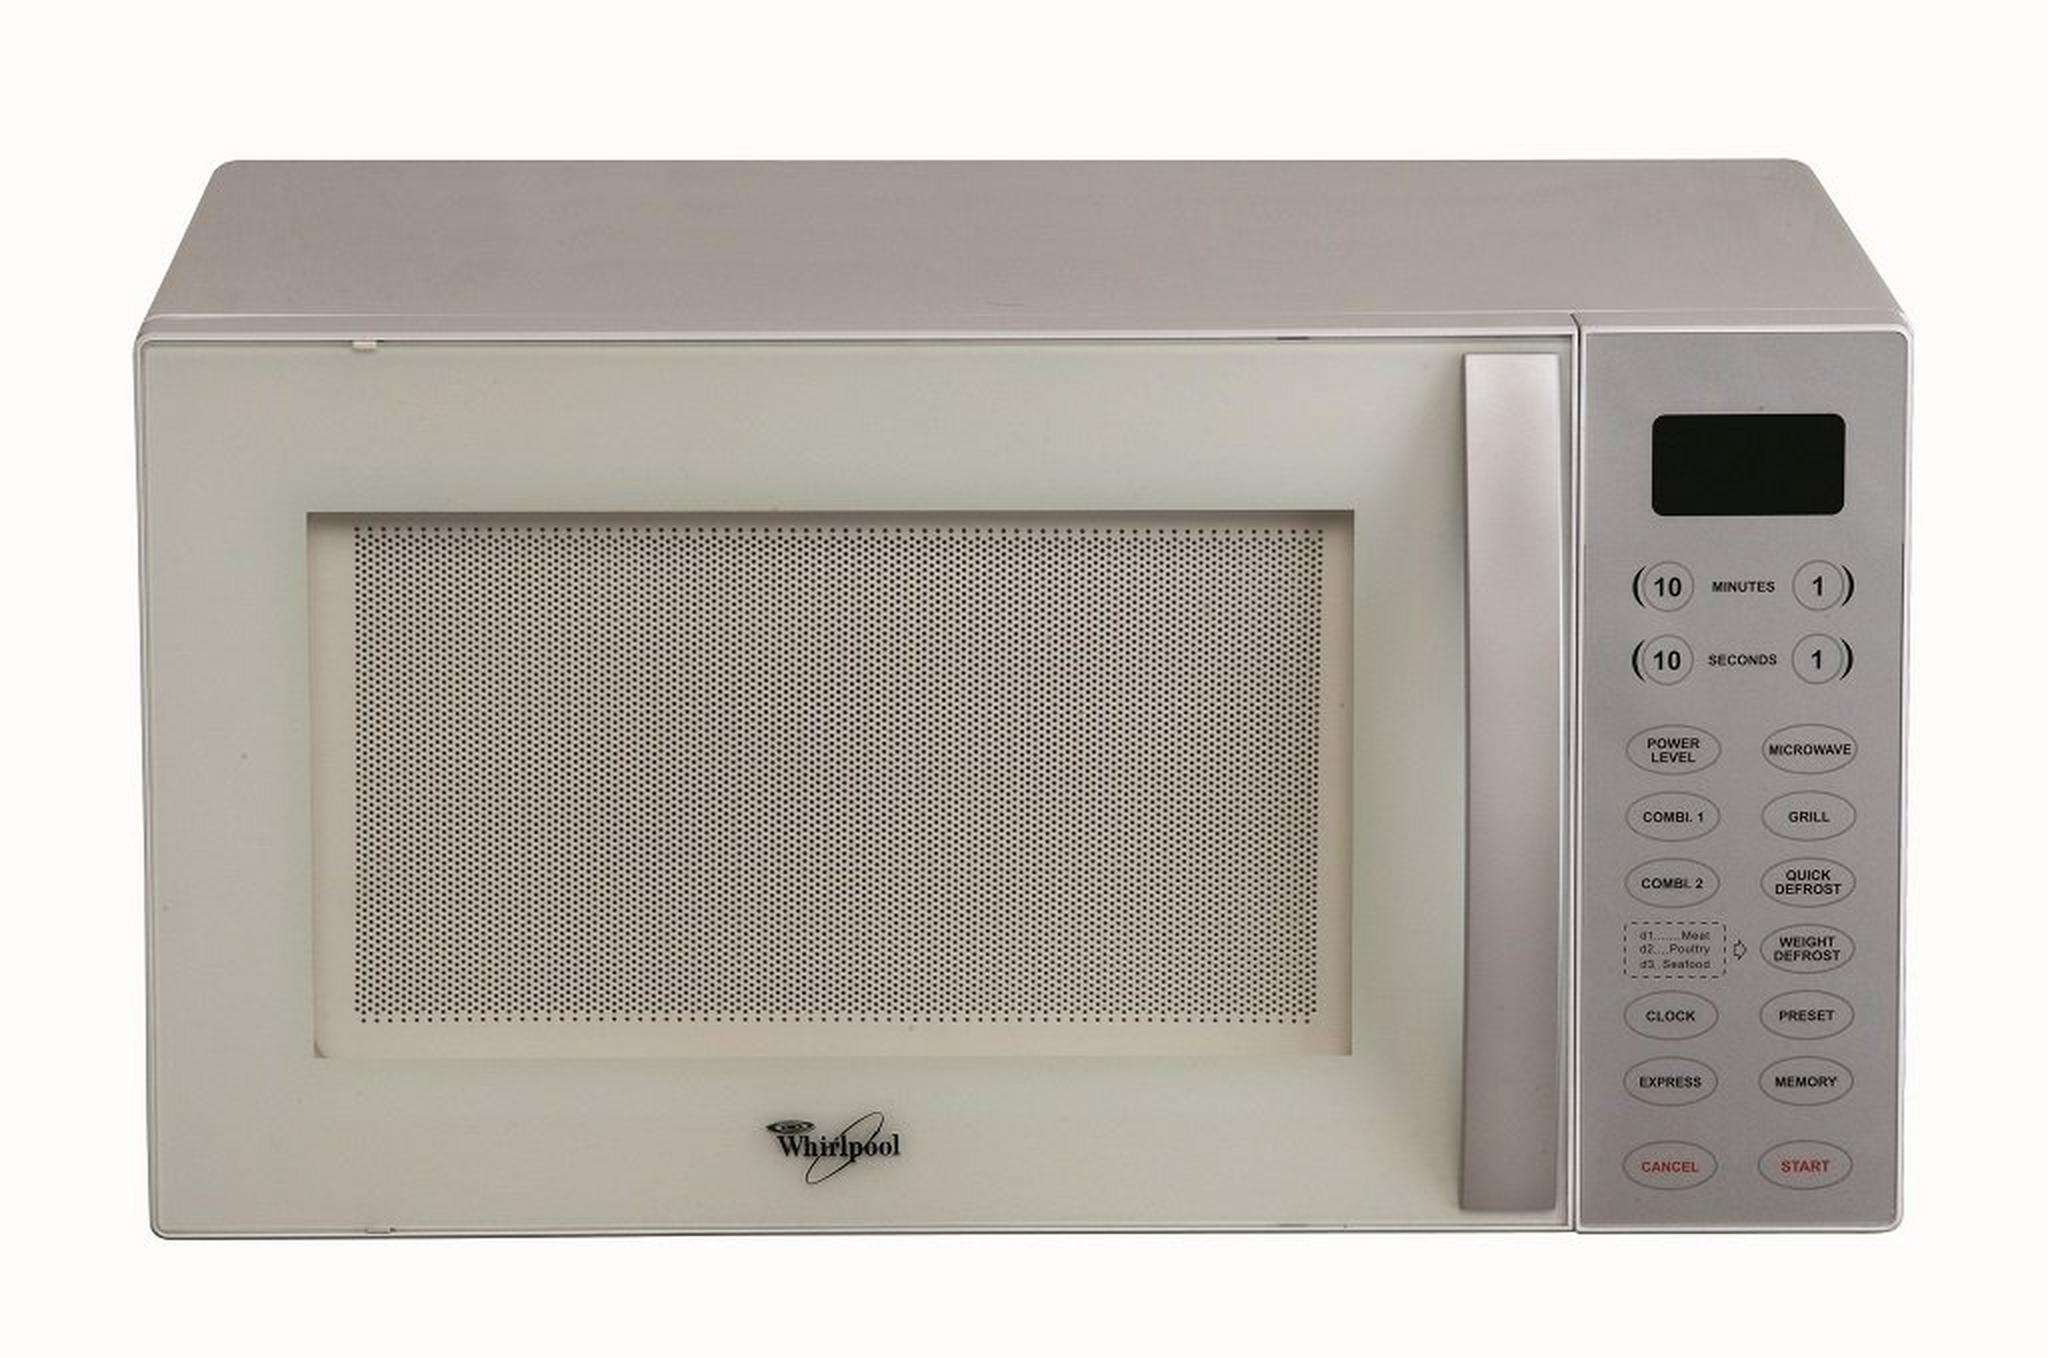 Whirlpool Grill Microwave (MWO611WH) 30 Litres - White